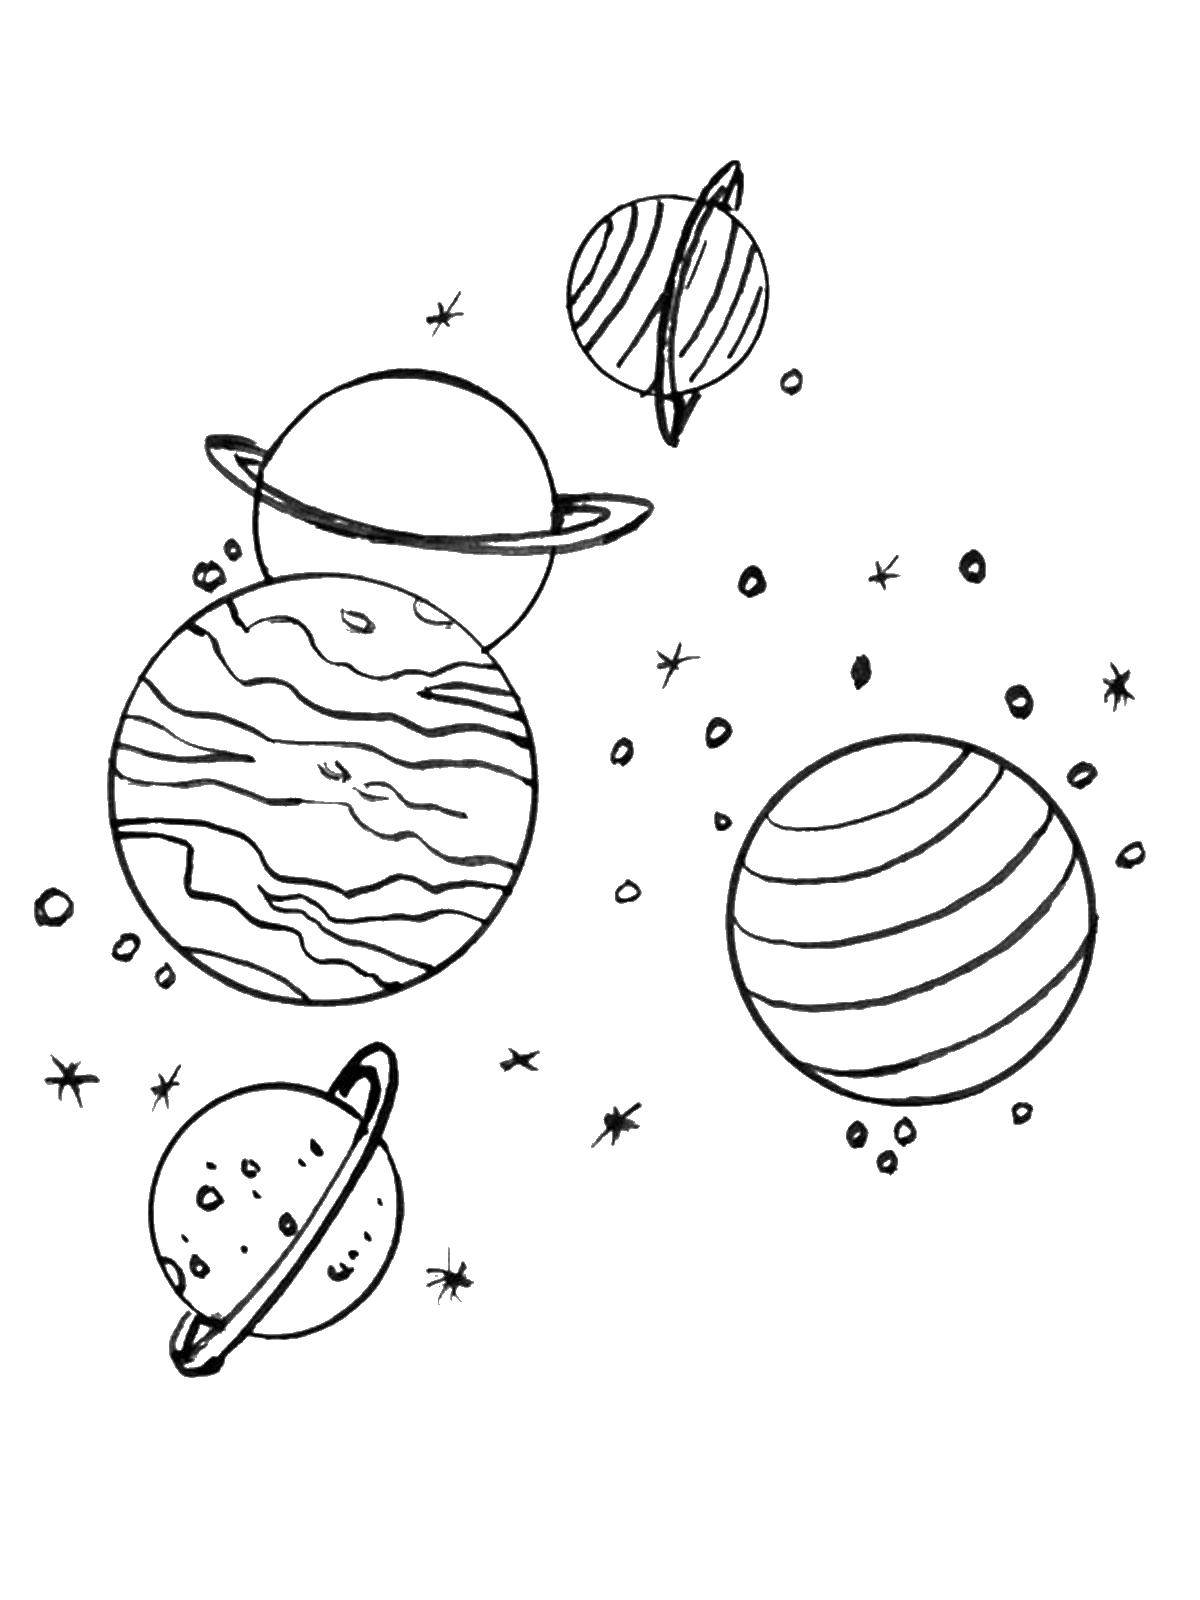 Coloring Planet in space. Category space. Tags:  planet.